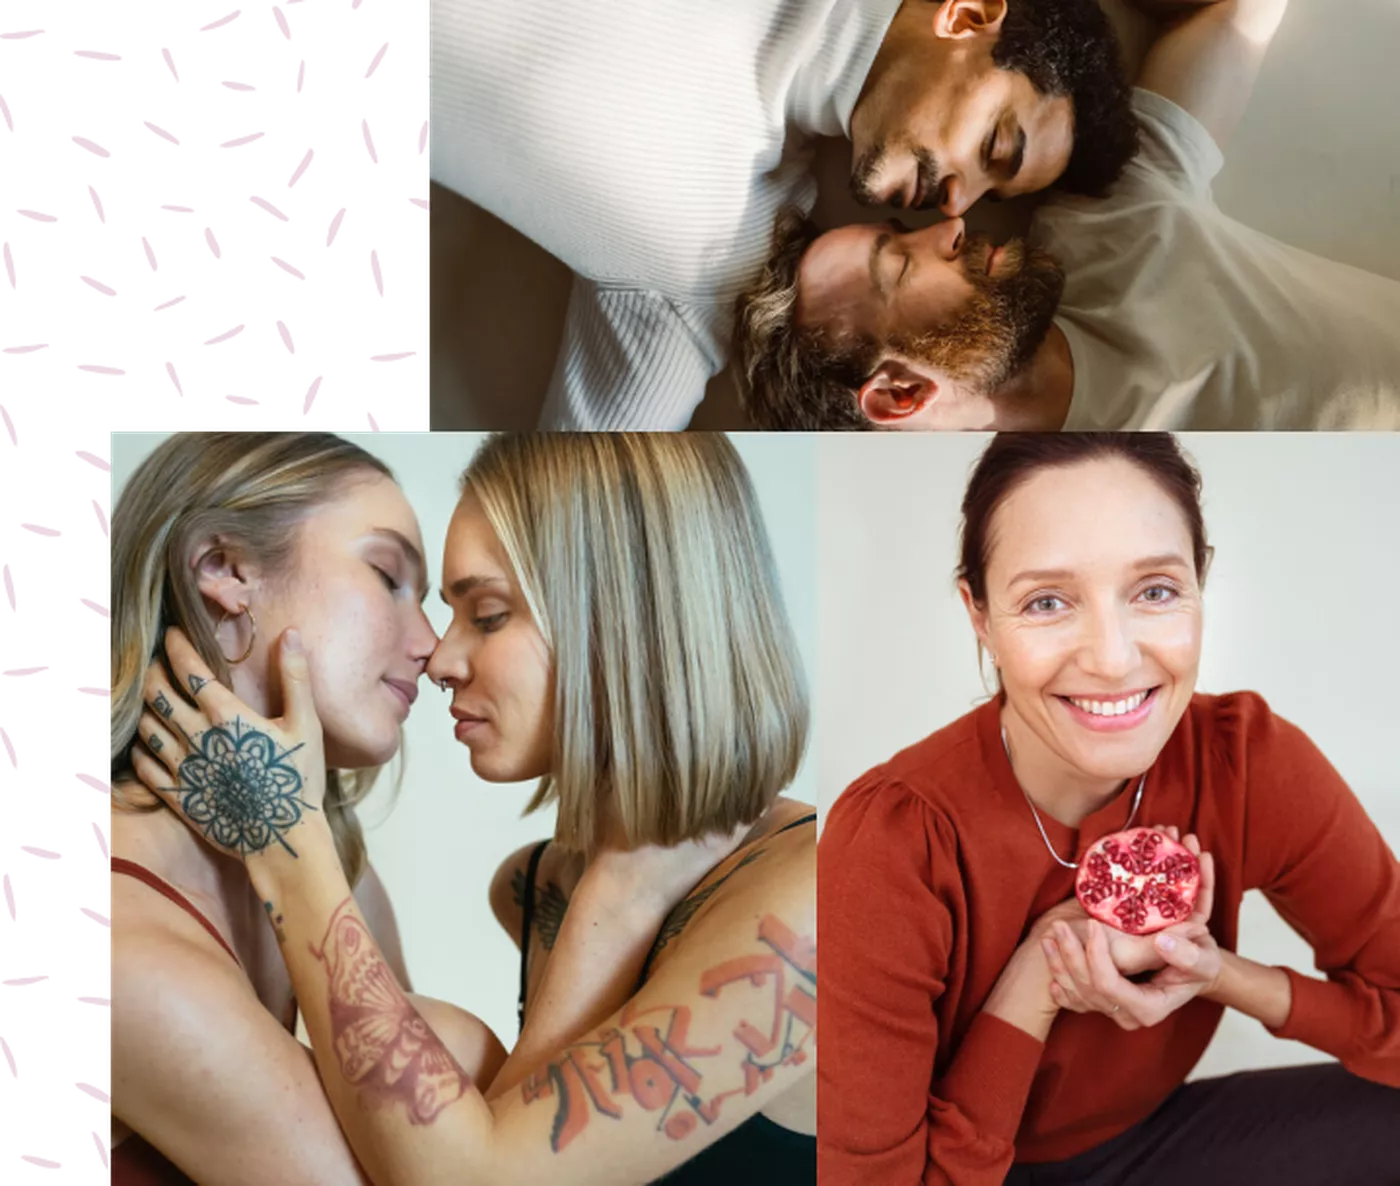 On the left woman kissing. On the top man laying next to each other. Below, a woman holding a pomegranate. 